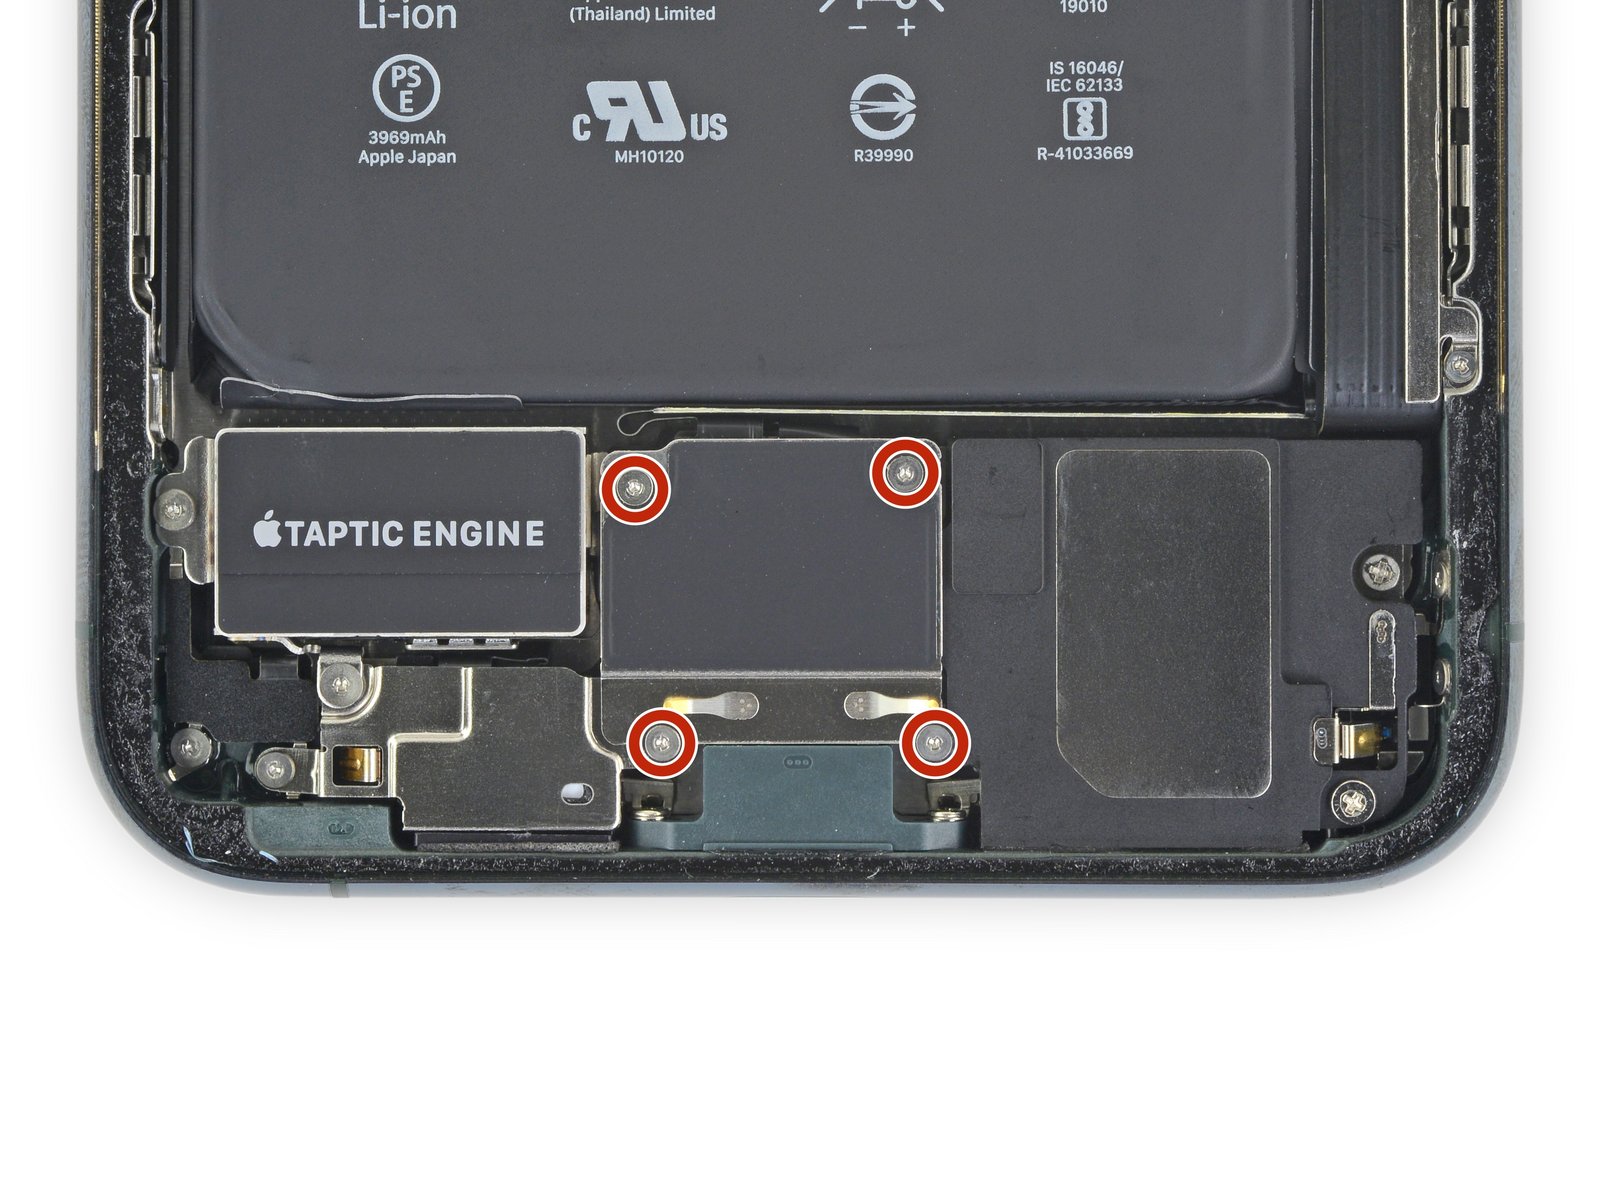 Unscrew the lower battery connector cover